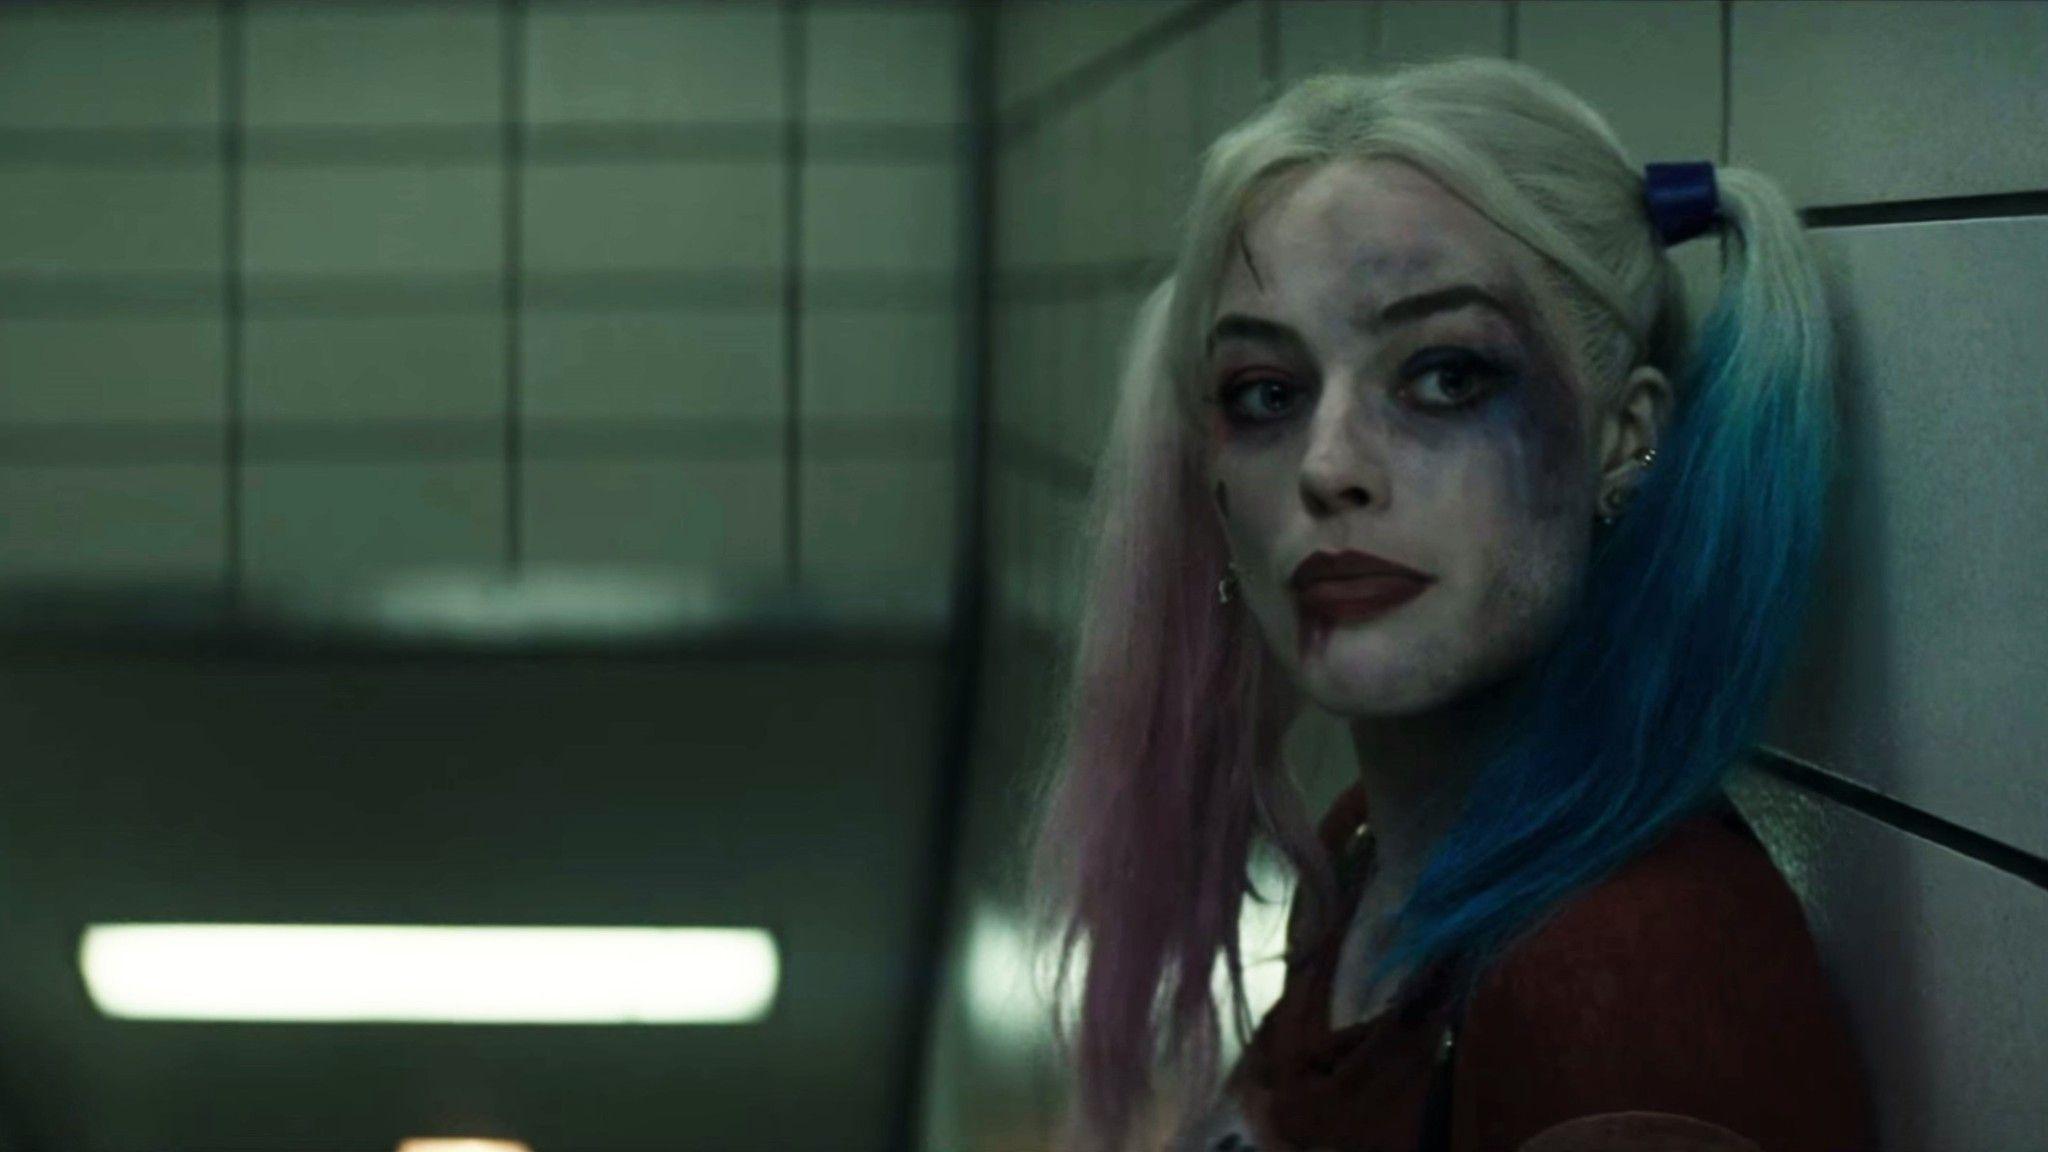 Download Harley Quinn Suicide Squad HD 4k Wallpaper In 2048x1152